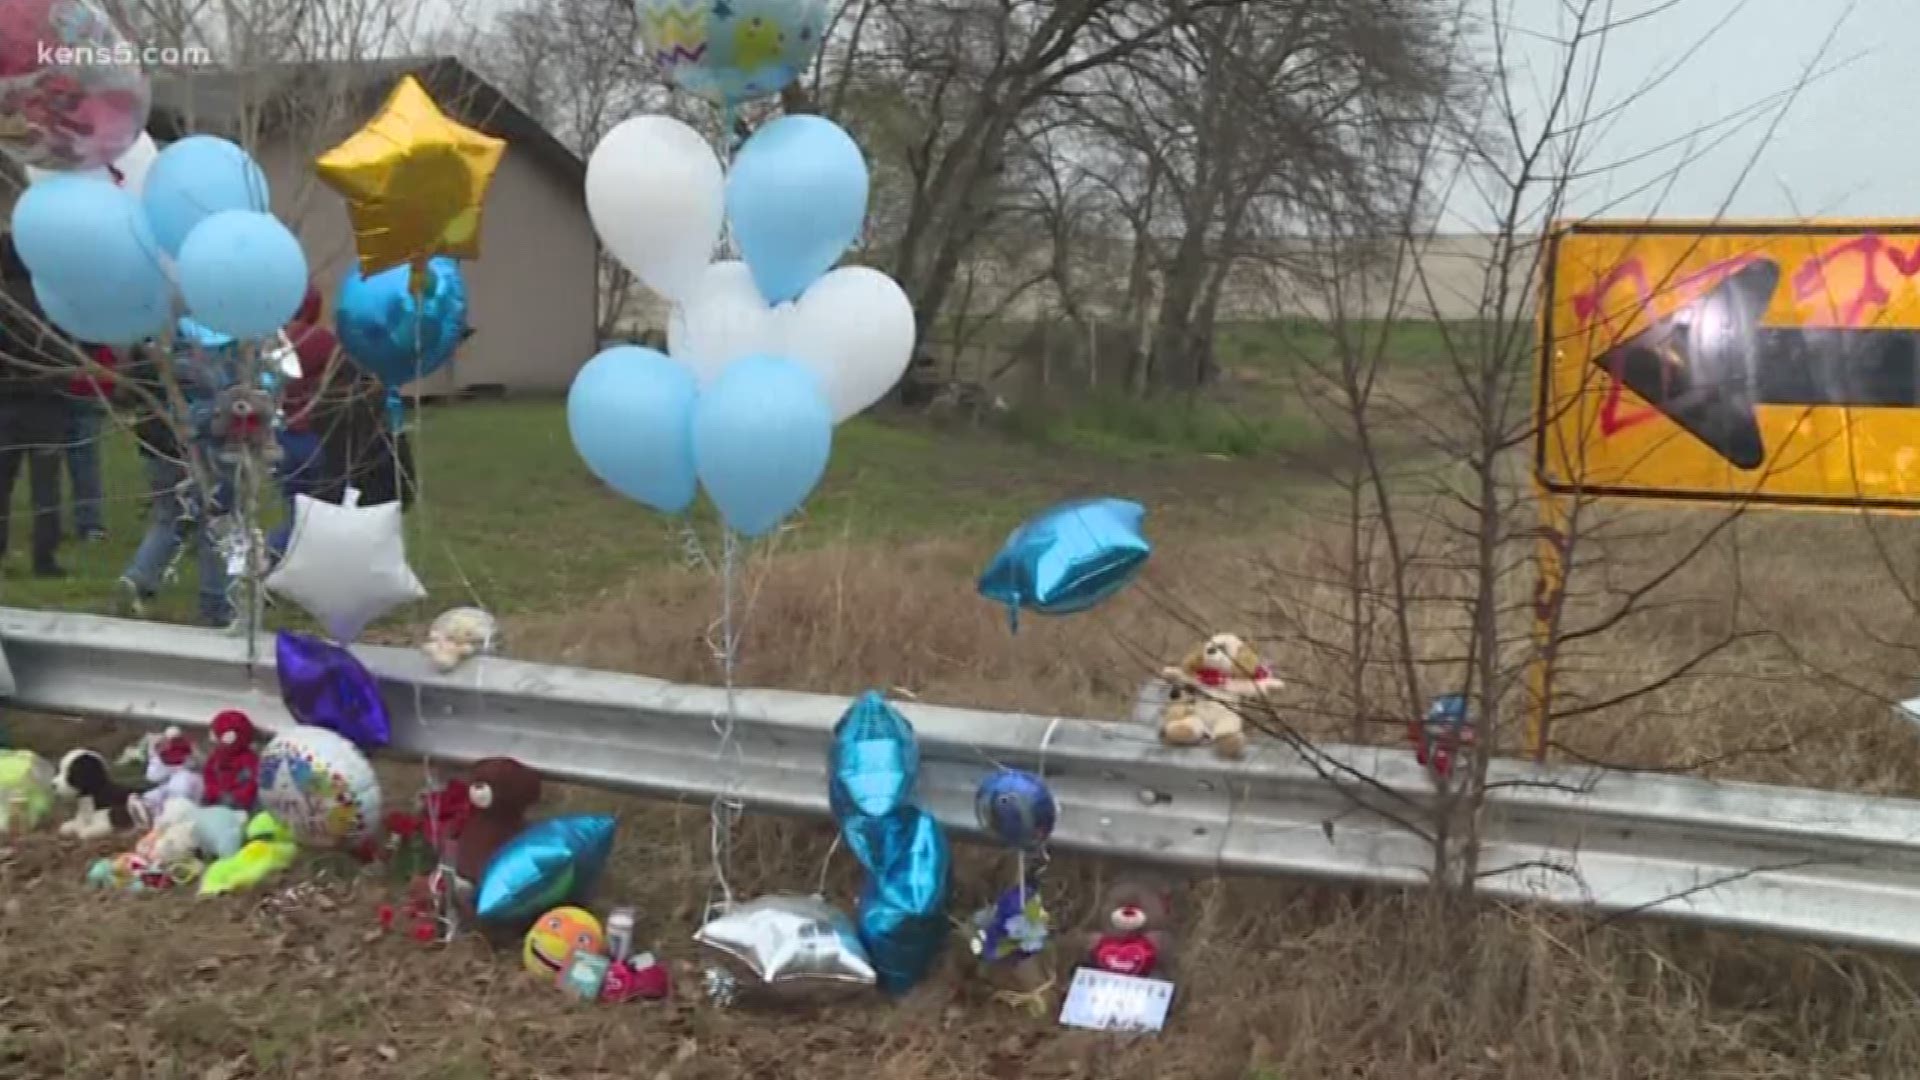 A memorial is growing at the spot on the northeast side where the body of baby King Jay Davila was found. Many of the mourners did not know the baby, but they wanted to pay their respects.